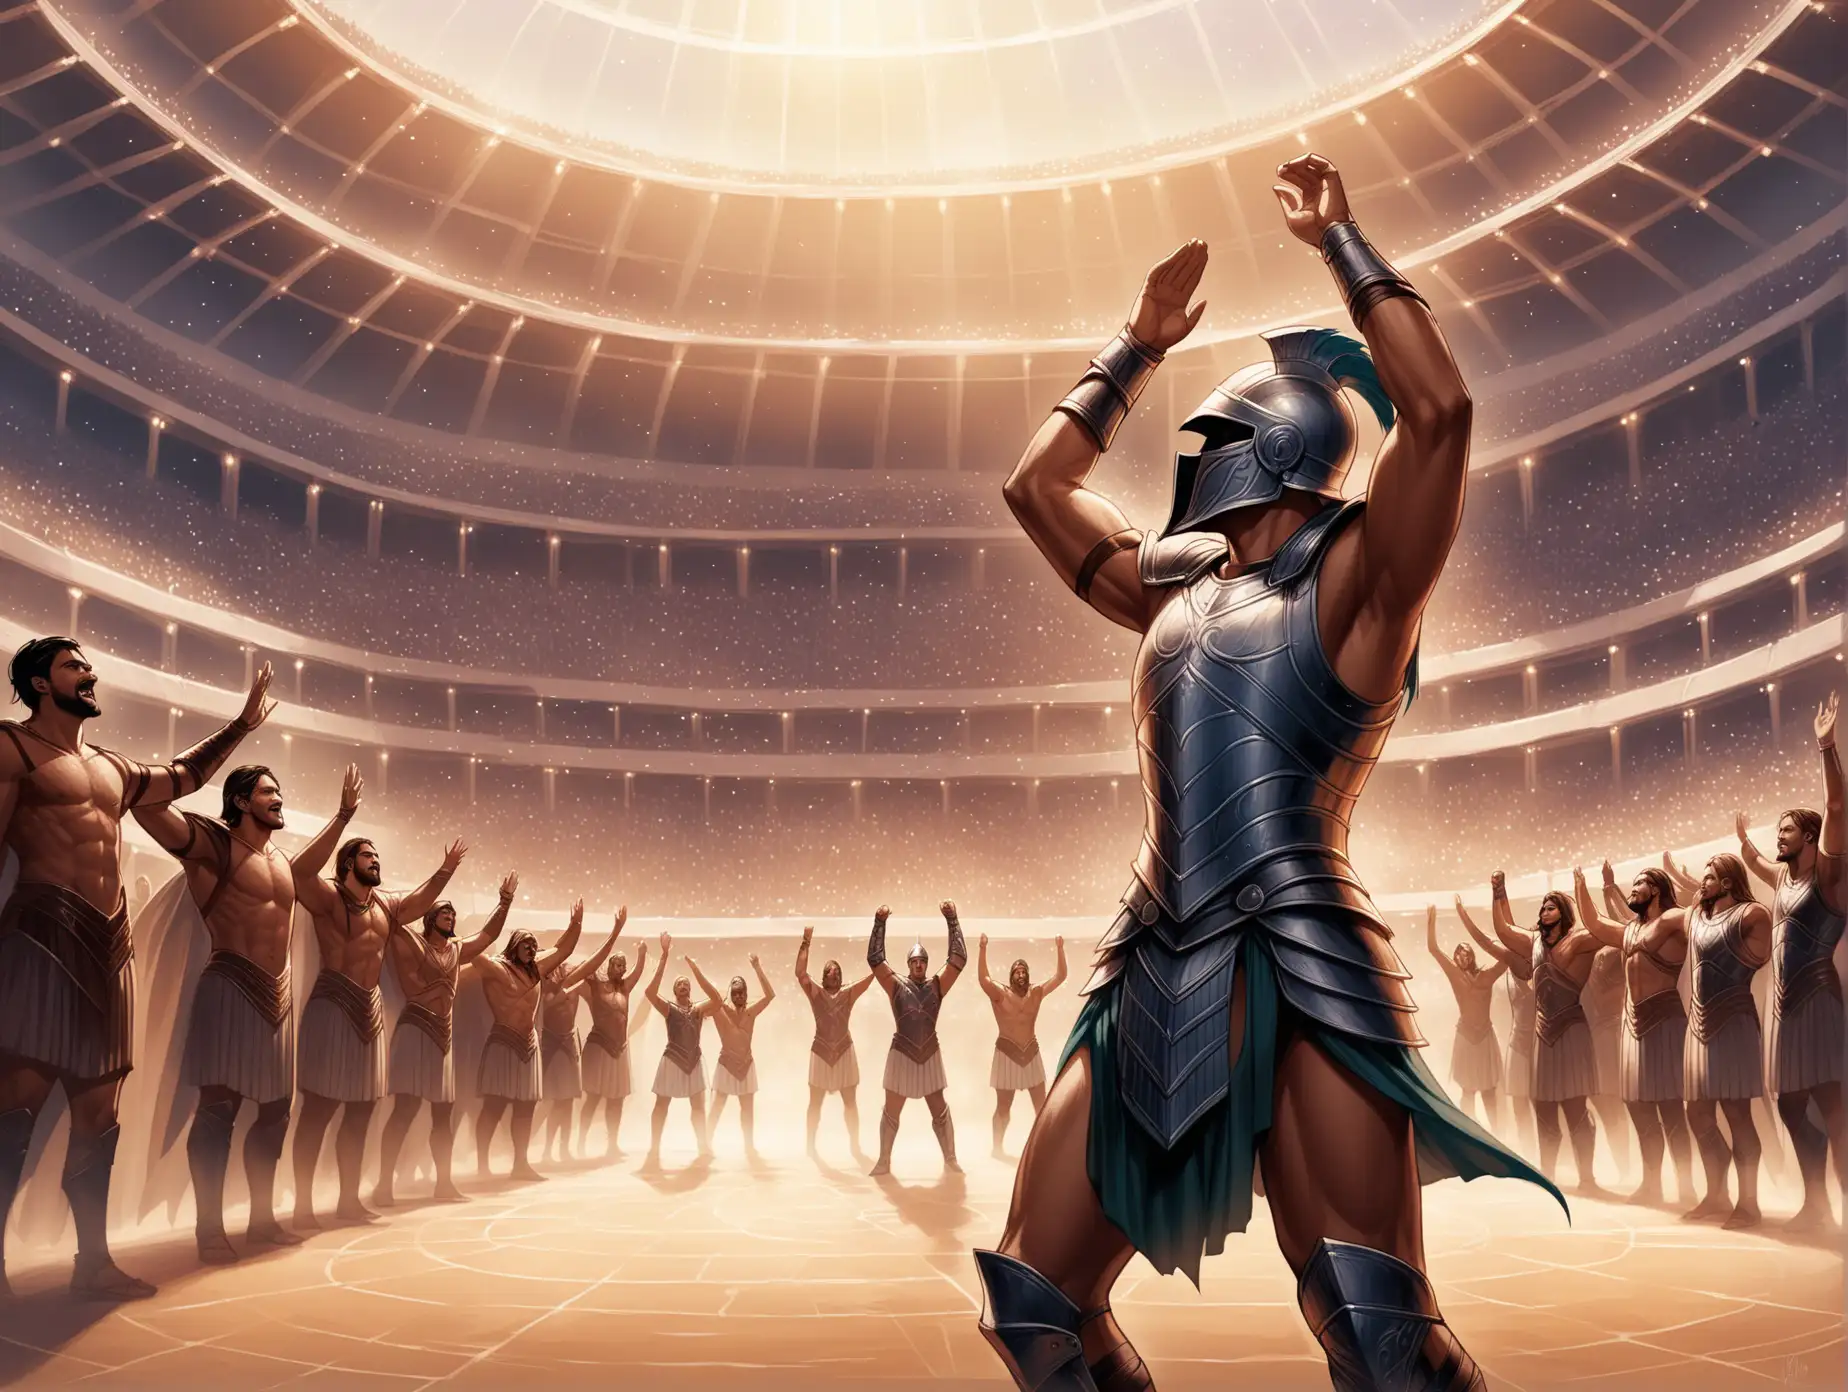 Victorious-Gladiator-Defeating-Demons-in-Arena-Fantasy-Art-by-Charlie-Bowater